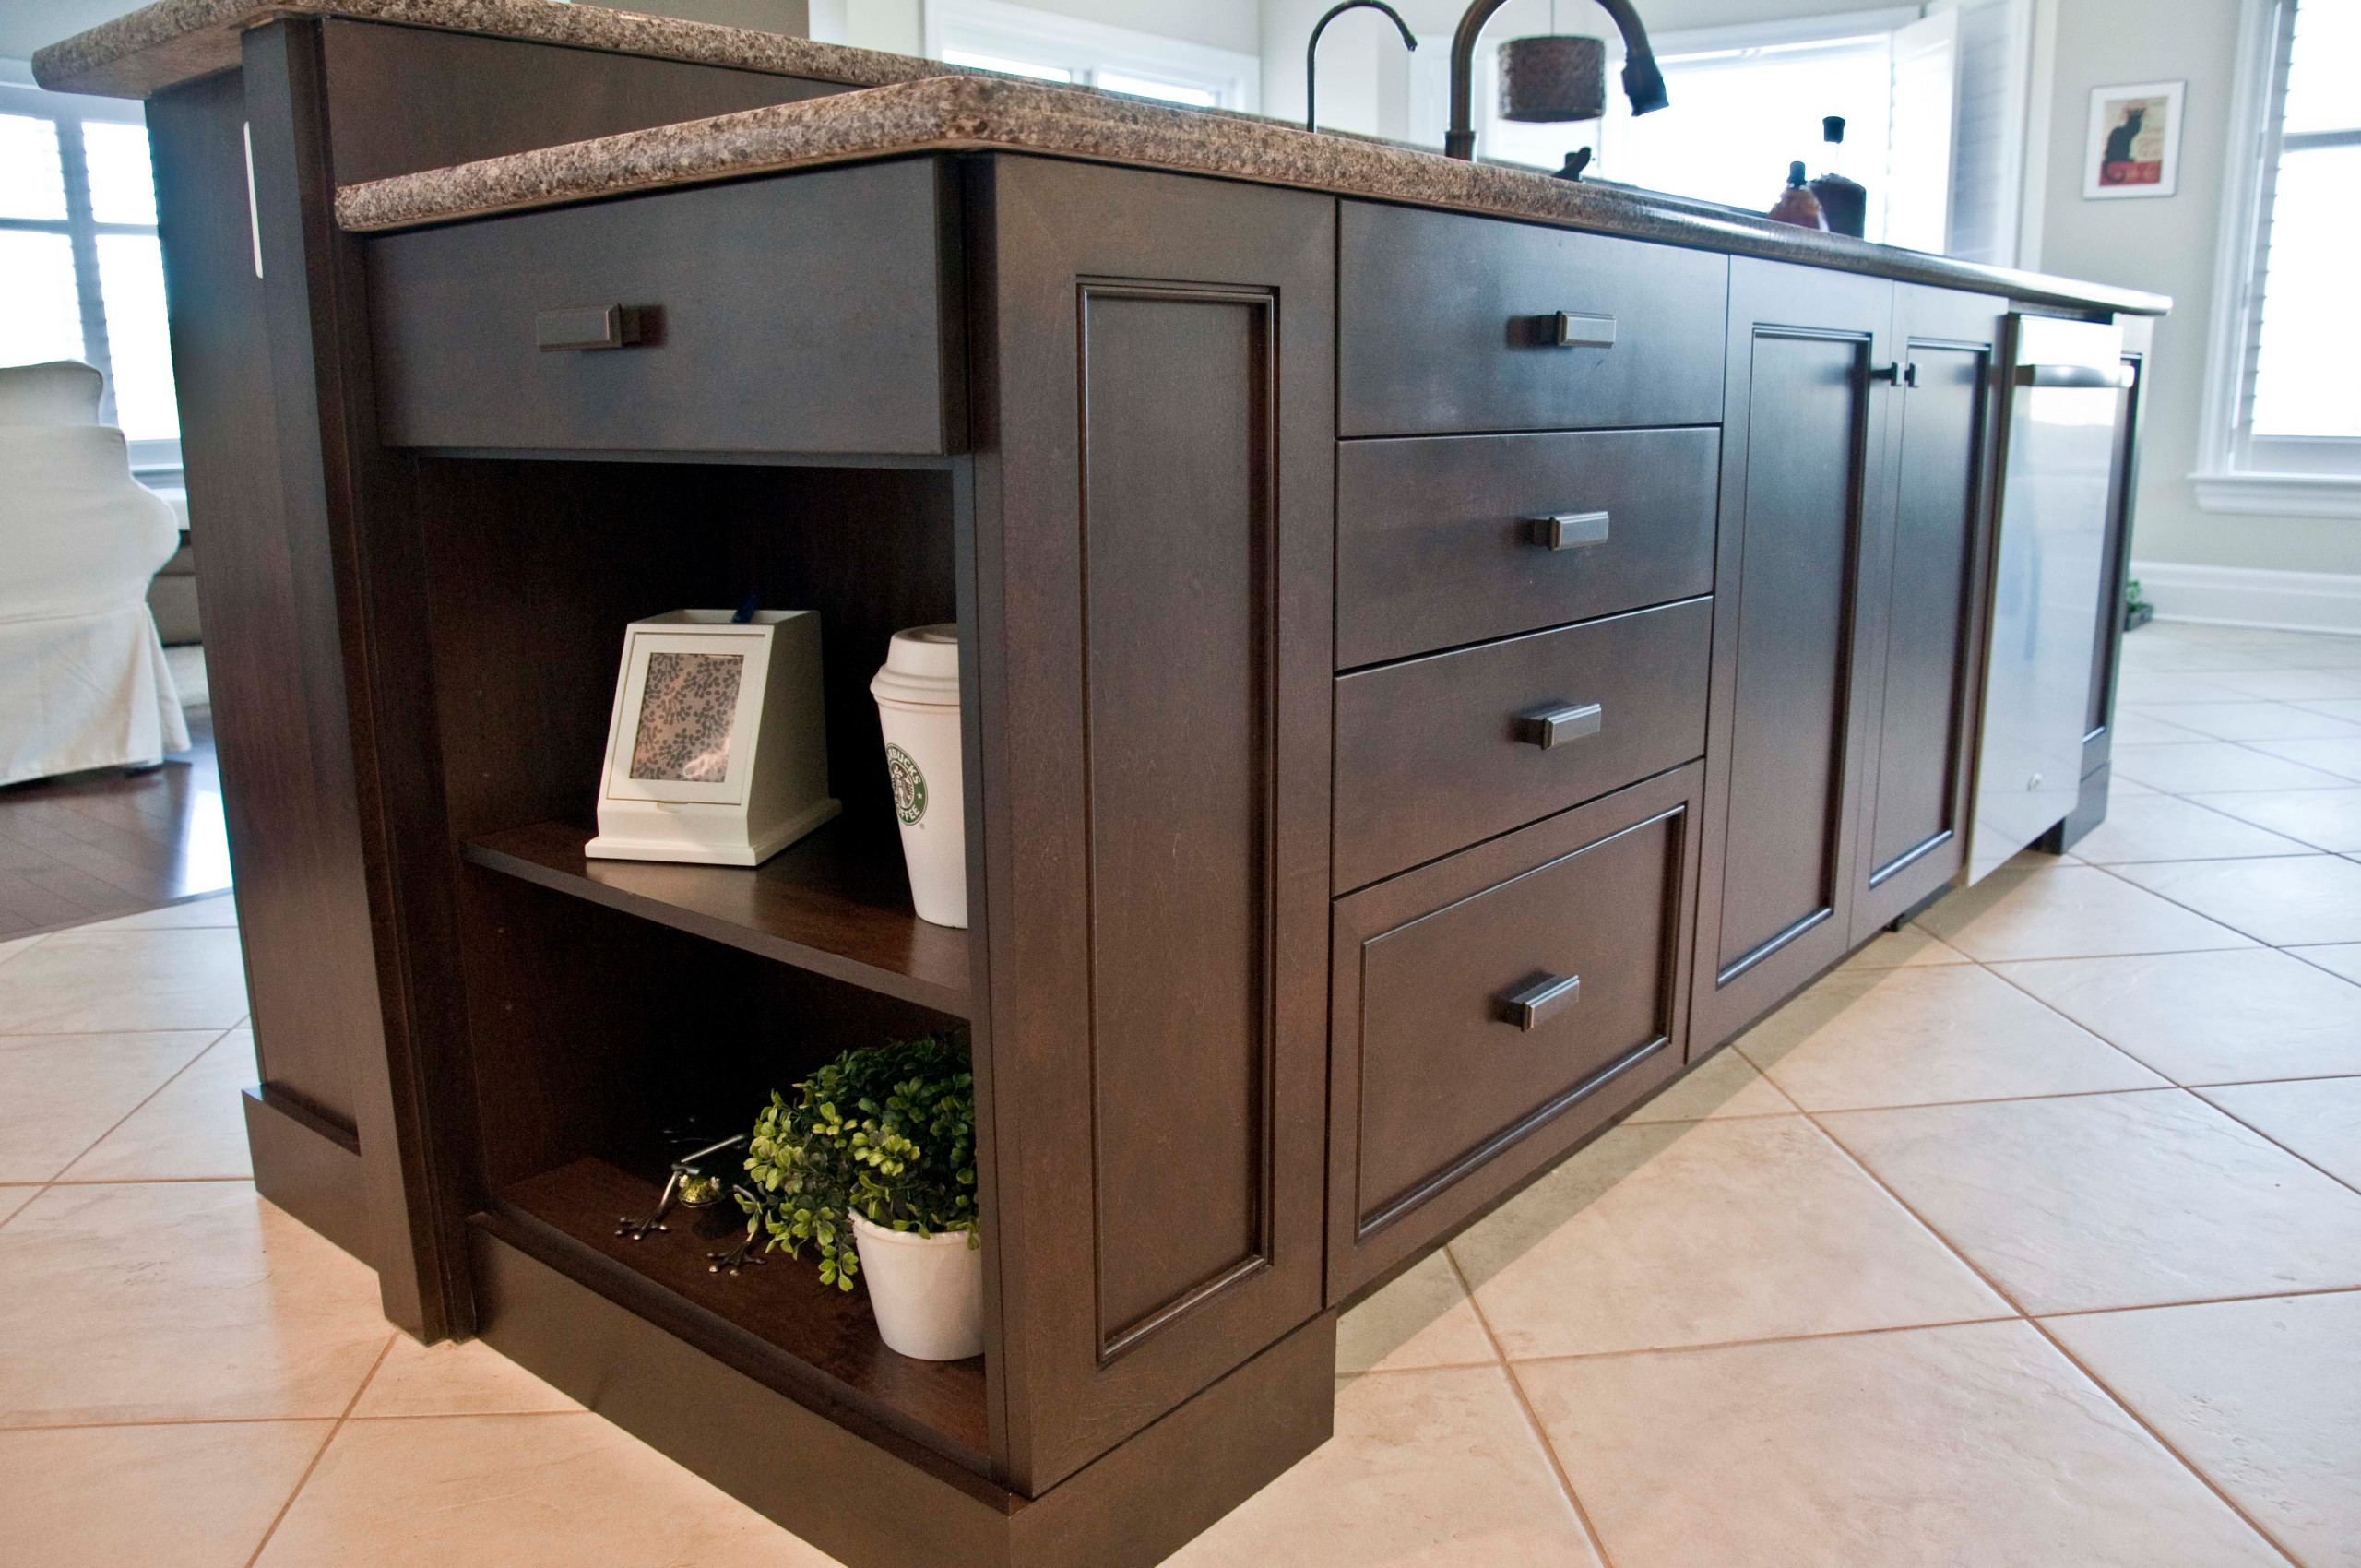 A kitchen island featuring open shelving